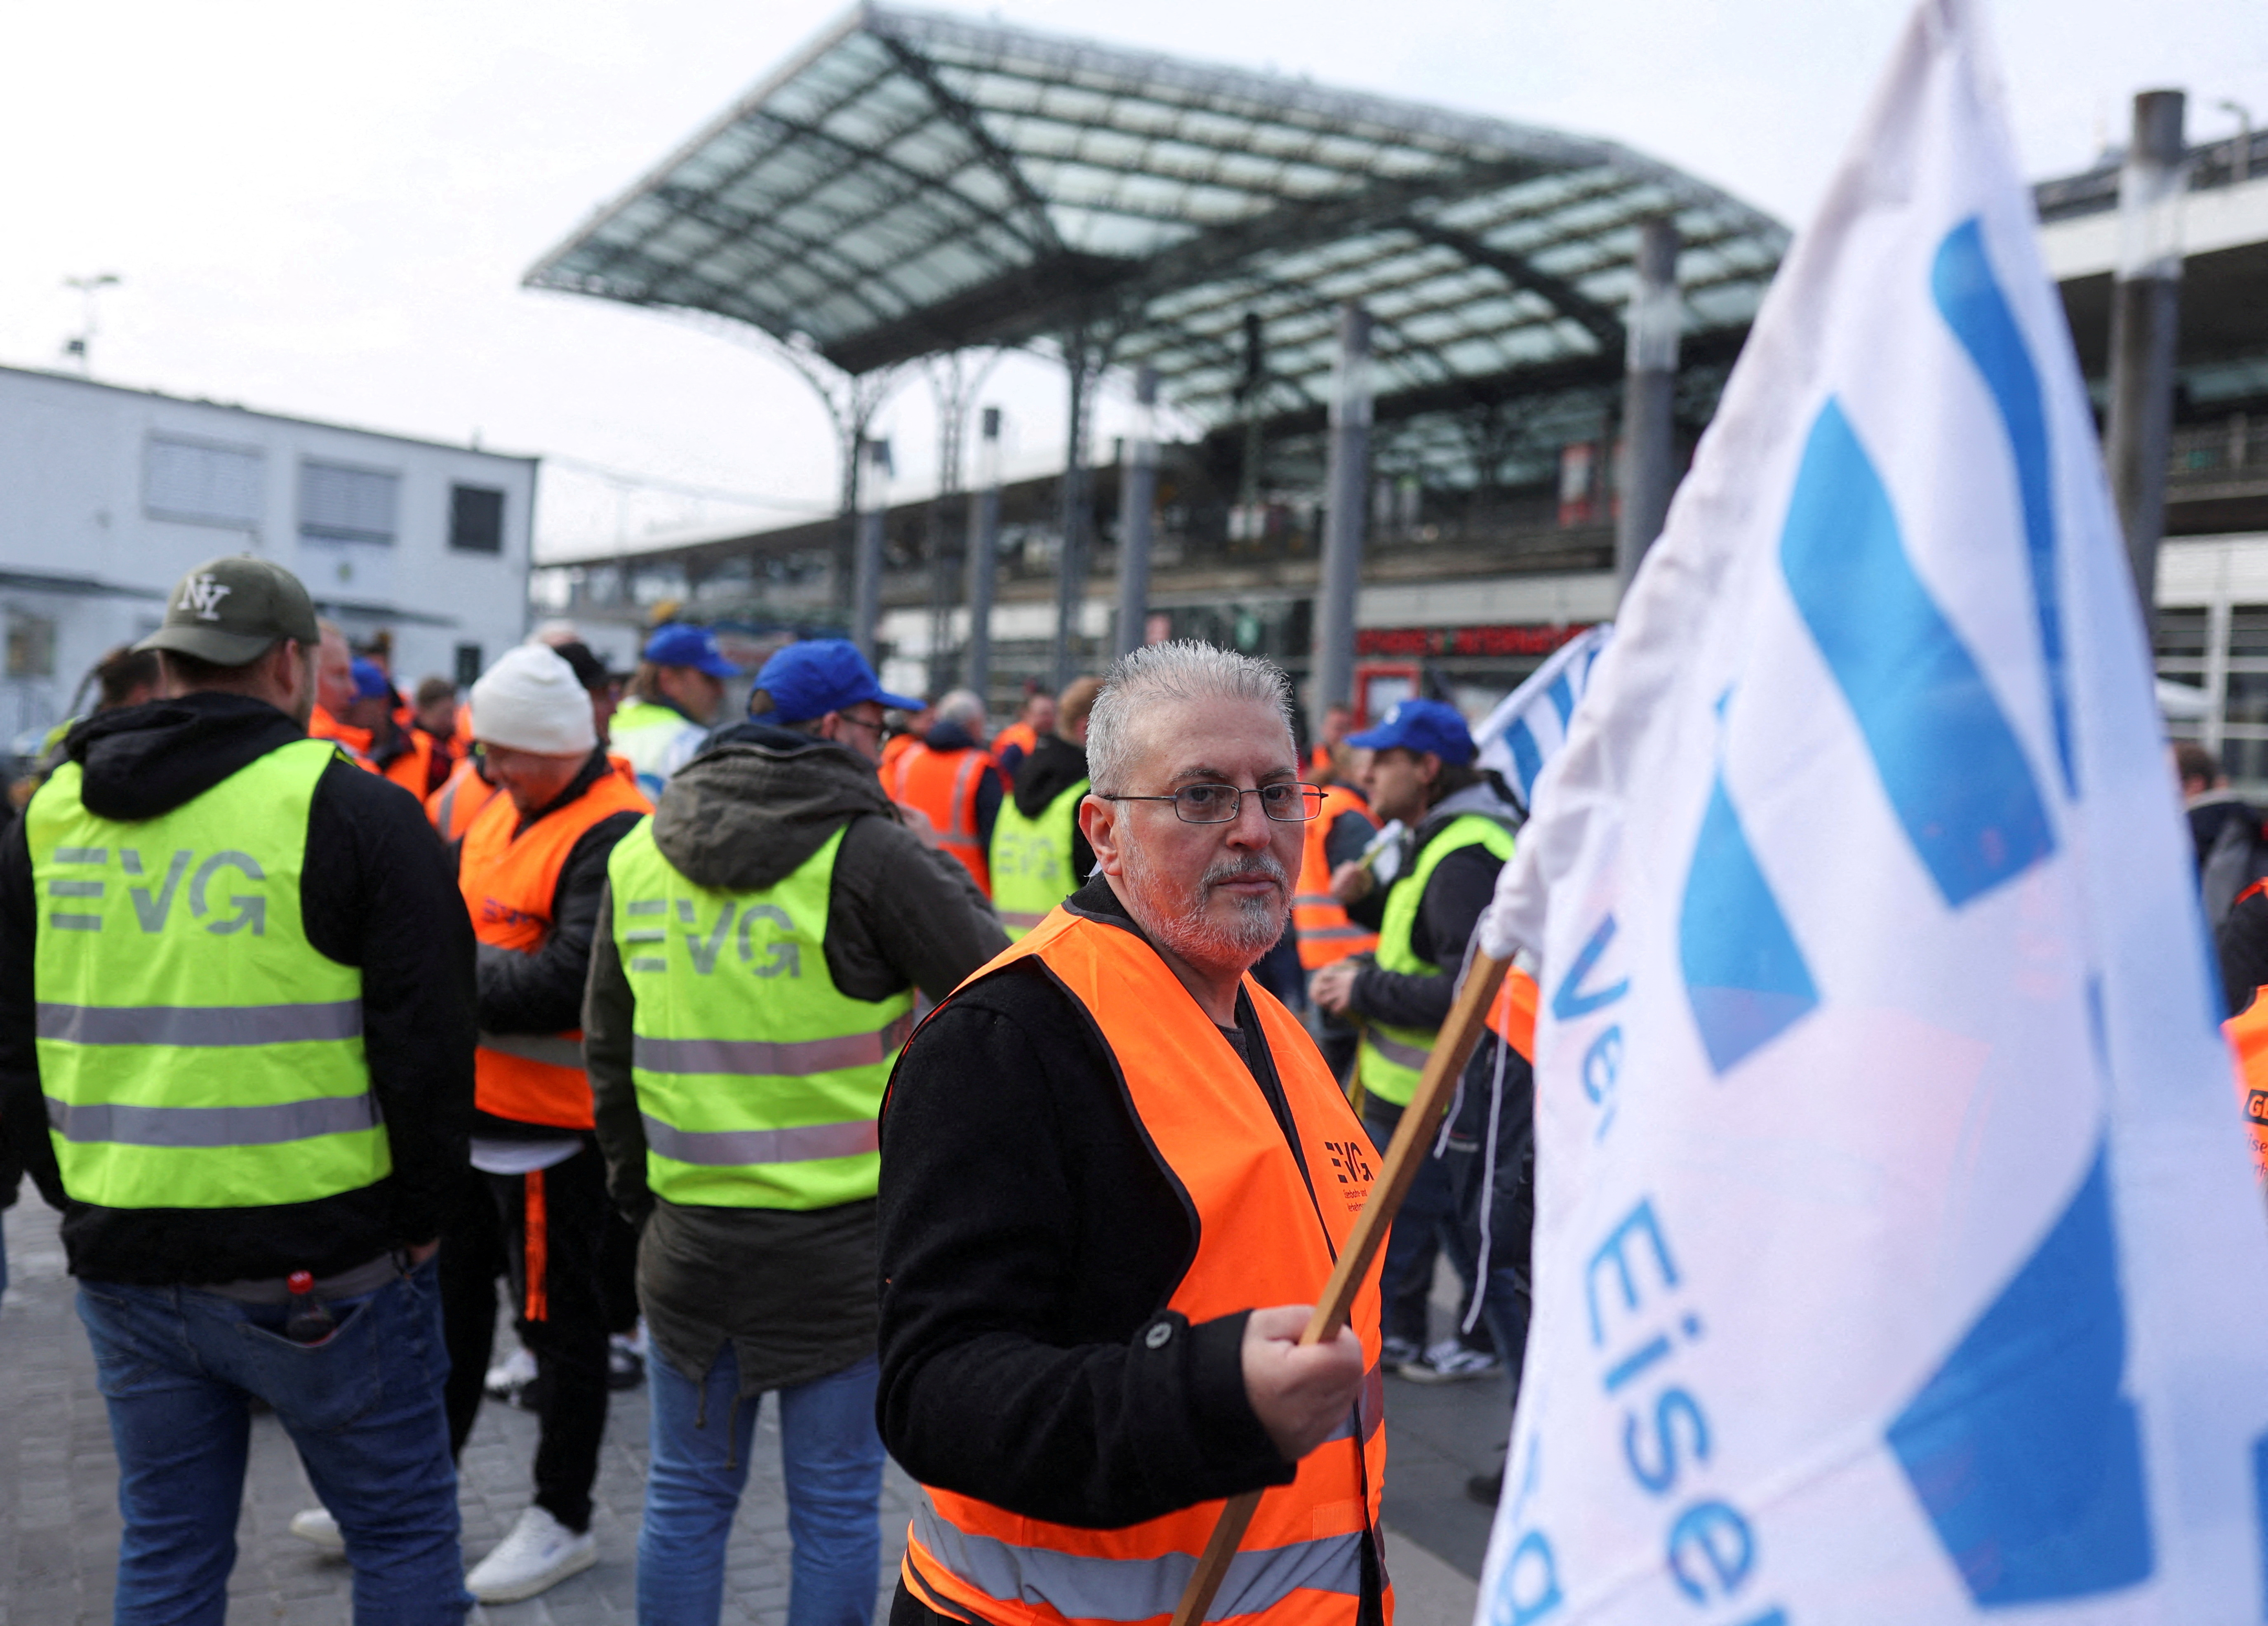 Germany's EVG rail union plans strikes after wage talks collapse